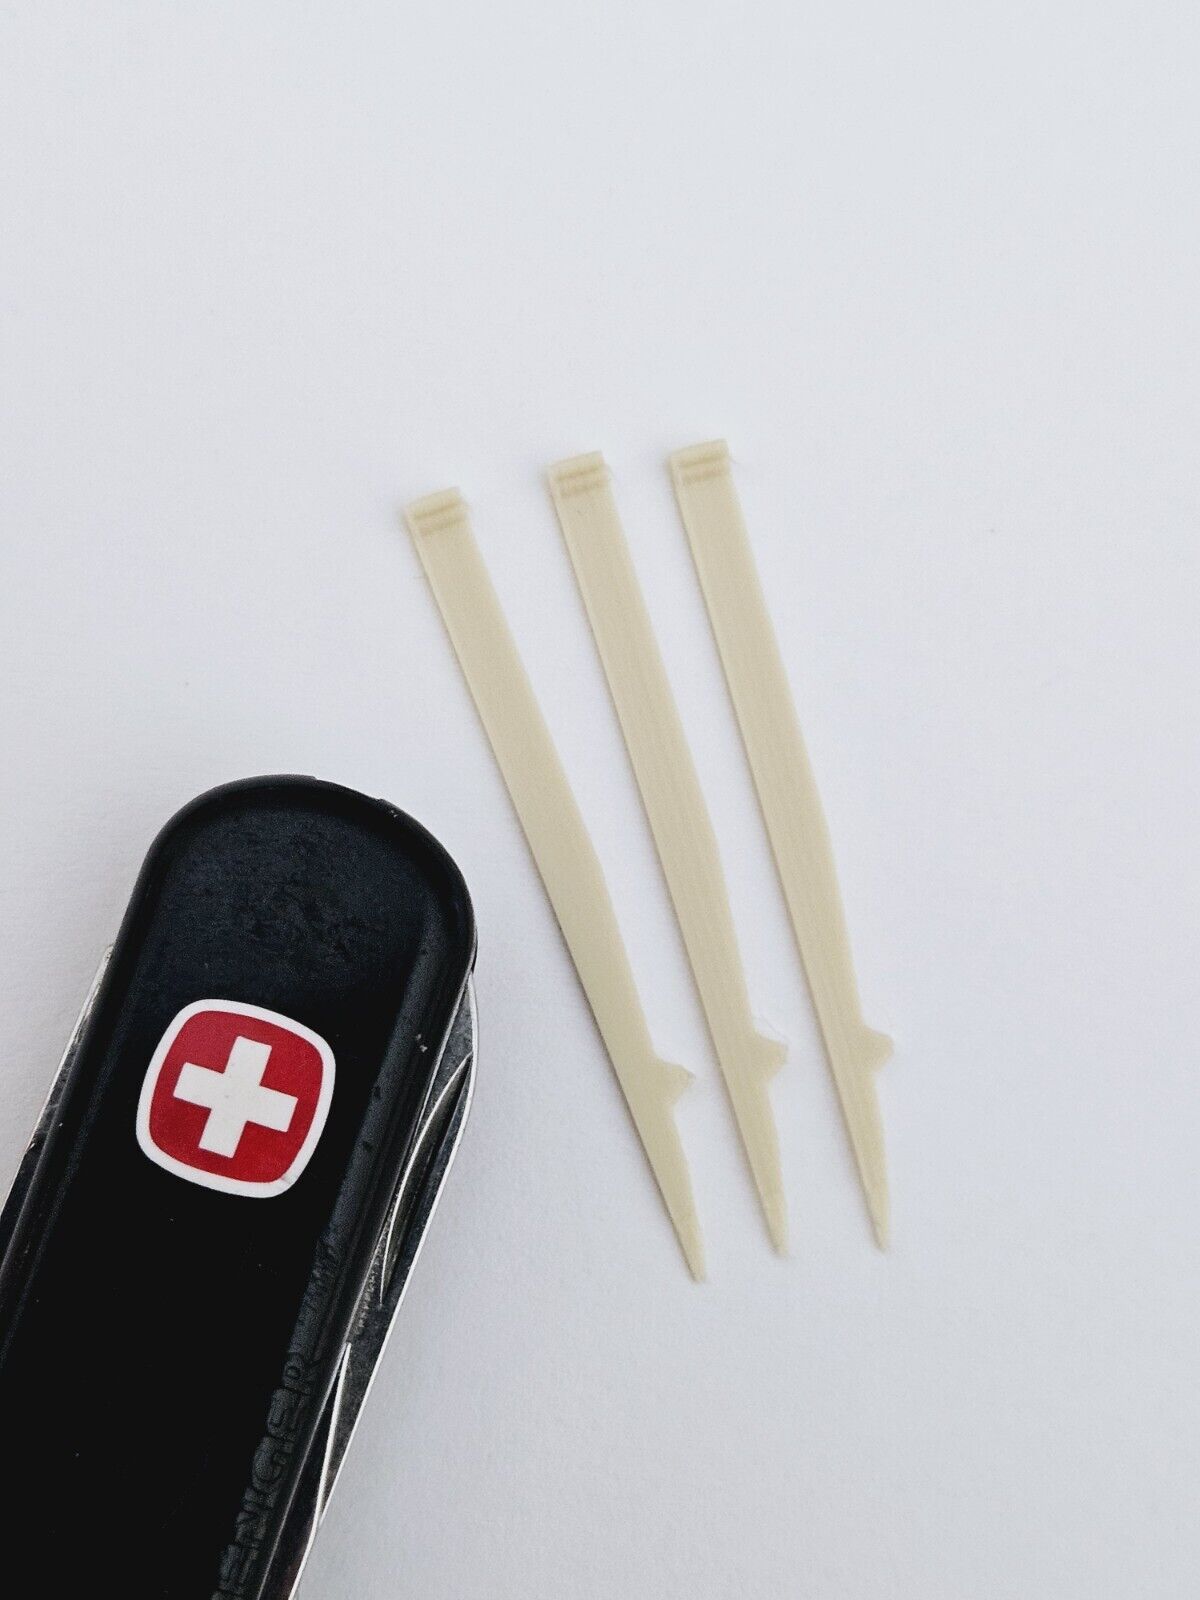 New 3Pk Flat Top Toothpick Replacement for WENGER Swiss Army Knives 65mm to 85mm